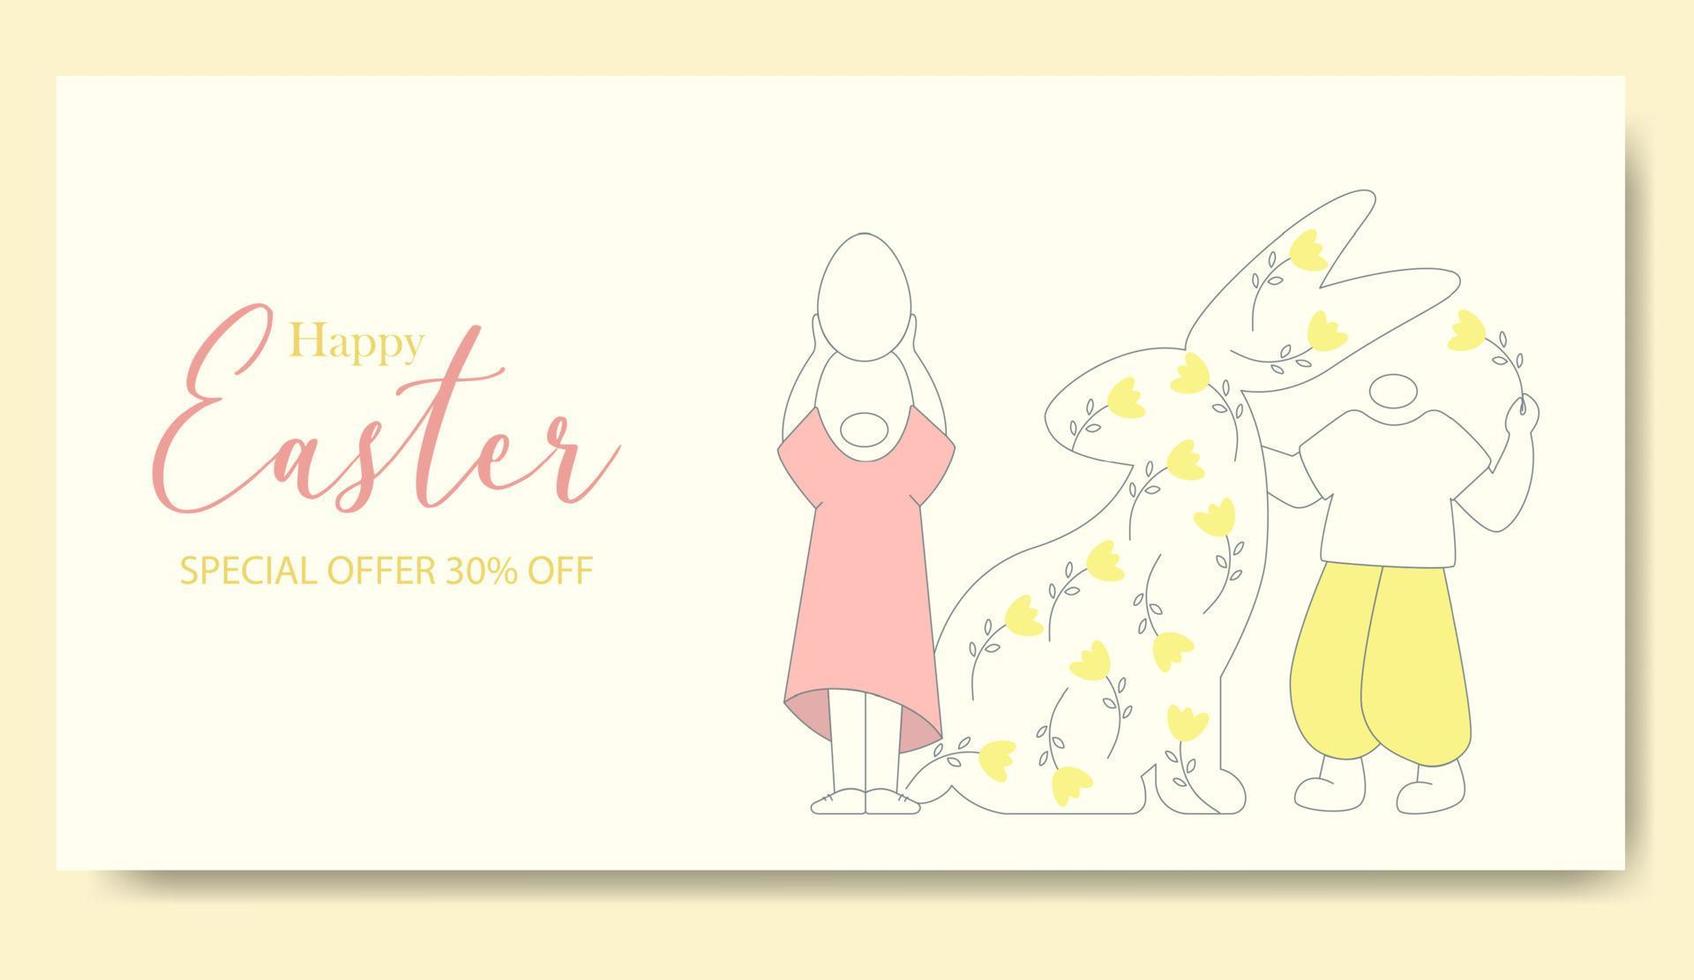 Happy Easter hunt minimalistic illustration characters banner. Sunday postcard, card, invitation, poster, banner template lettering typography. Seasons Greetings vector